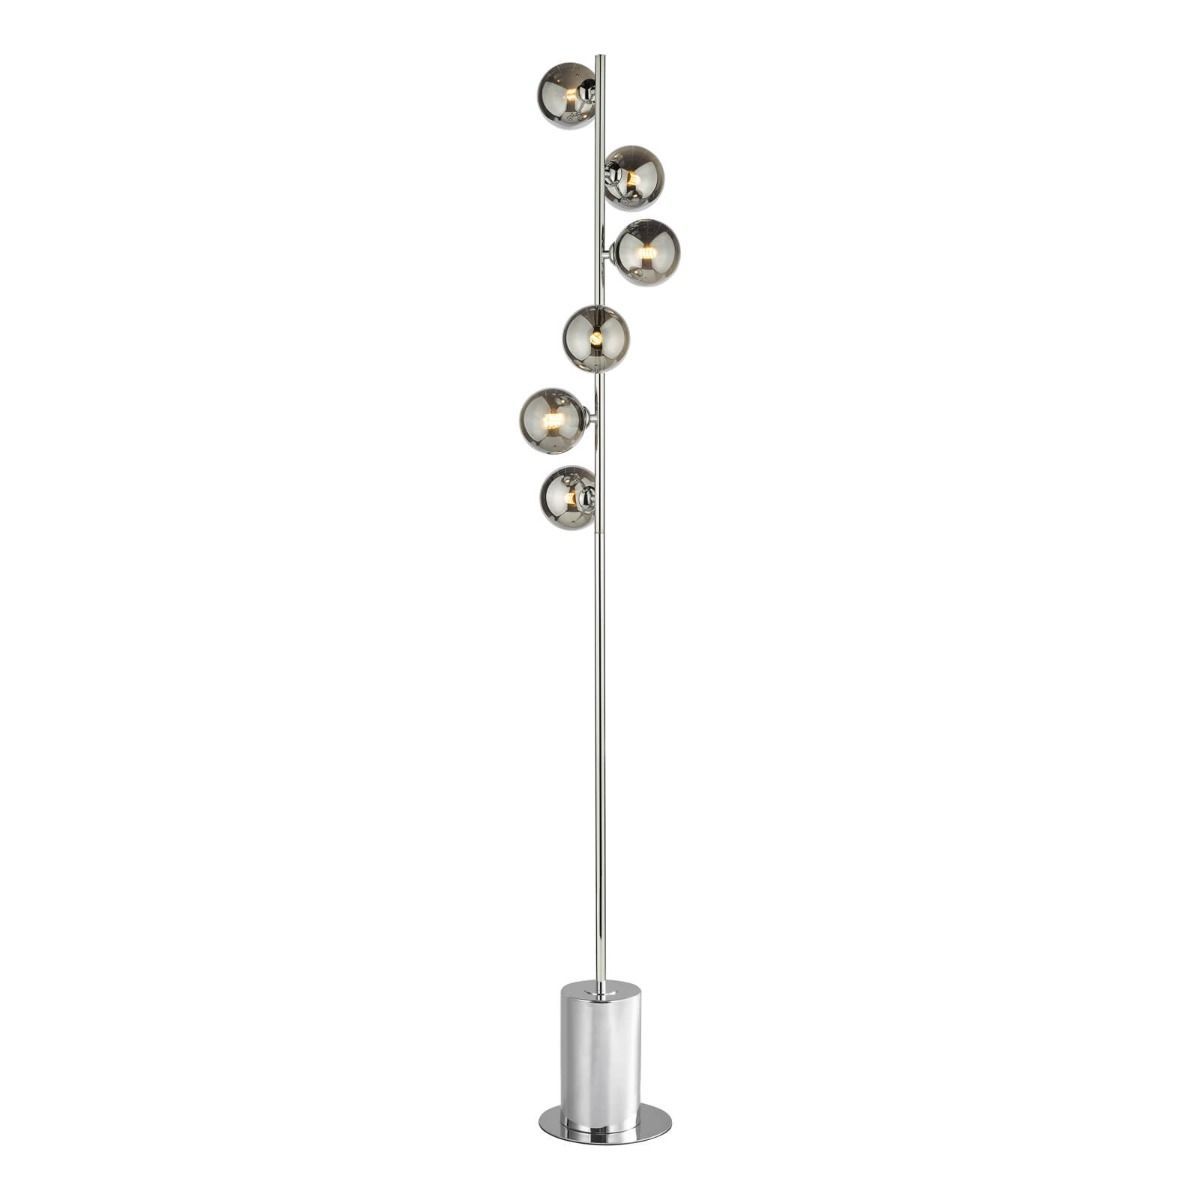 Spiral 6 Light Floor Lamp Polished Chrome Smoked Glass Pertaining To Chrome Floor Lamps (View 4 of 15)